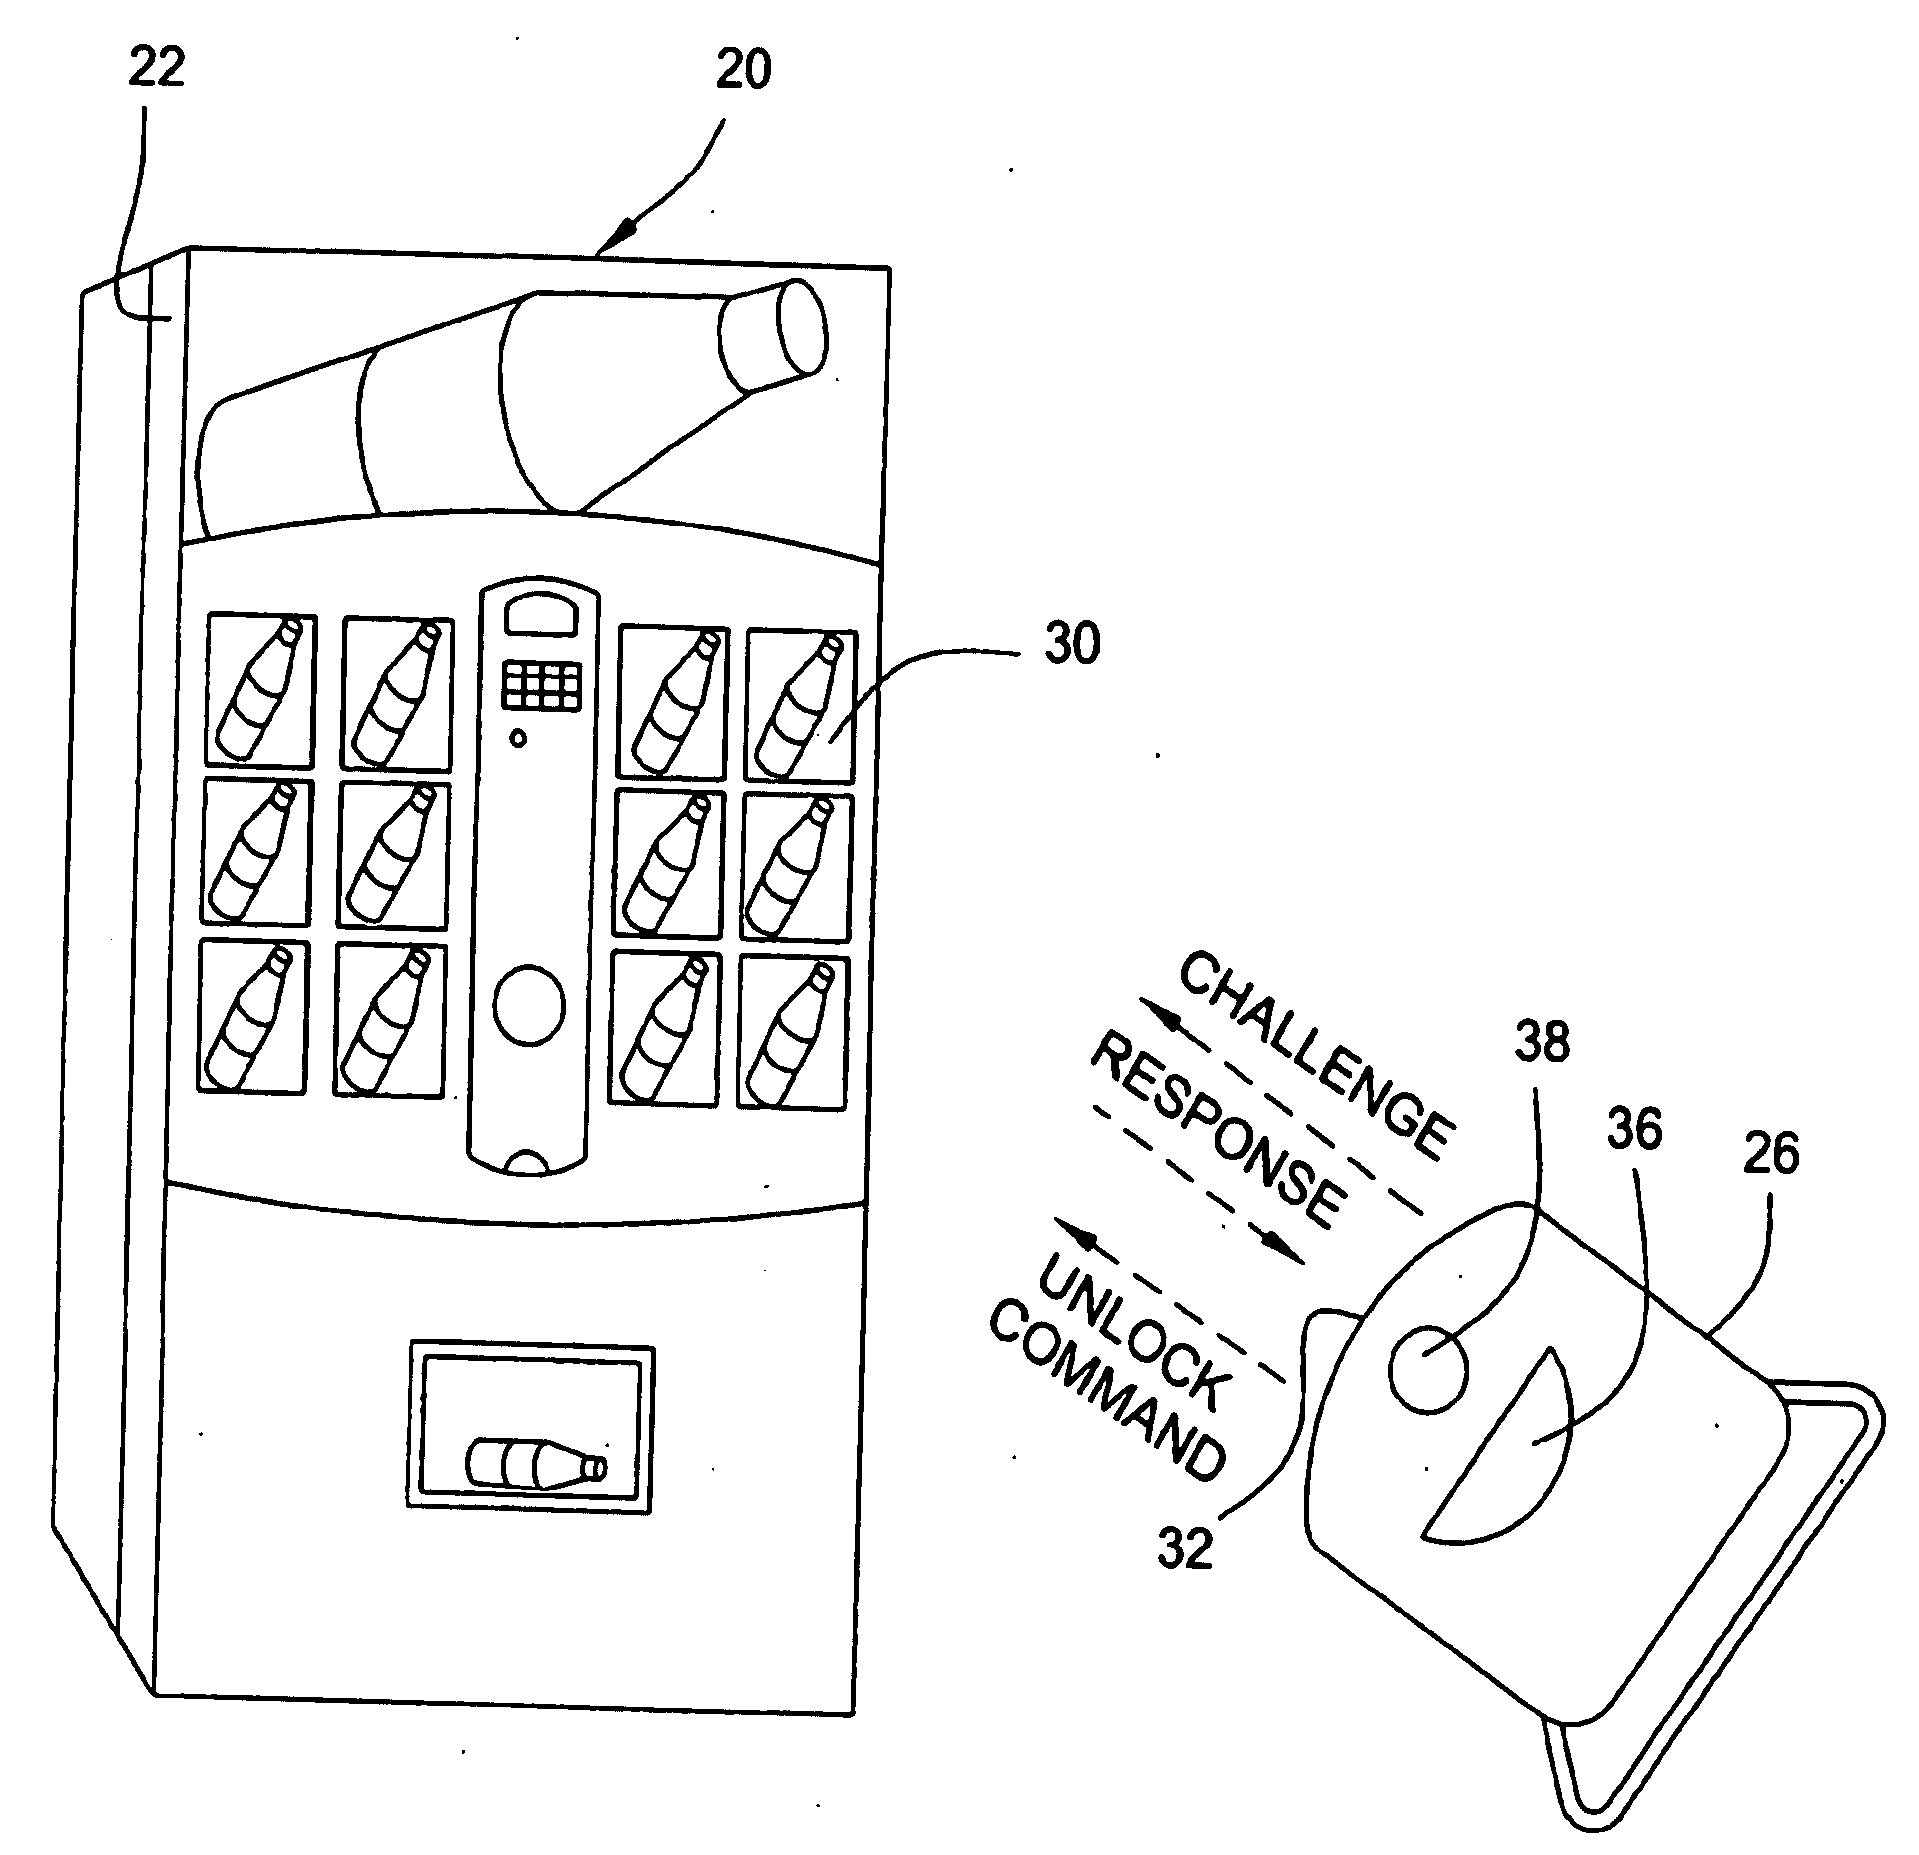 Vending machines with field-programmable electronic locks